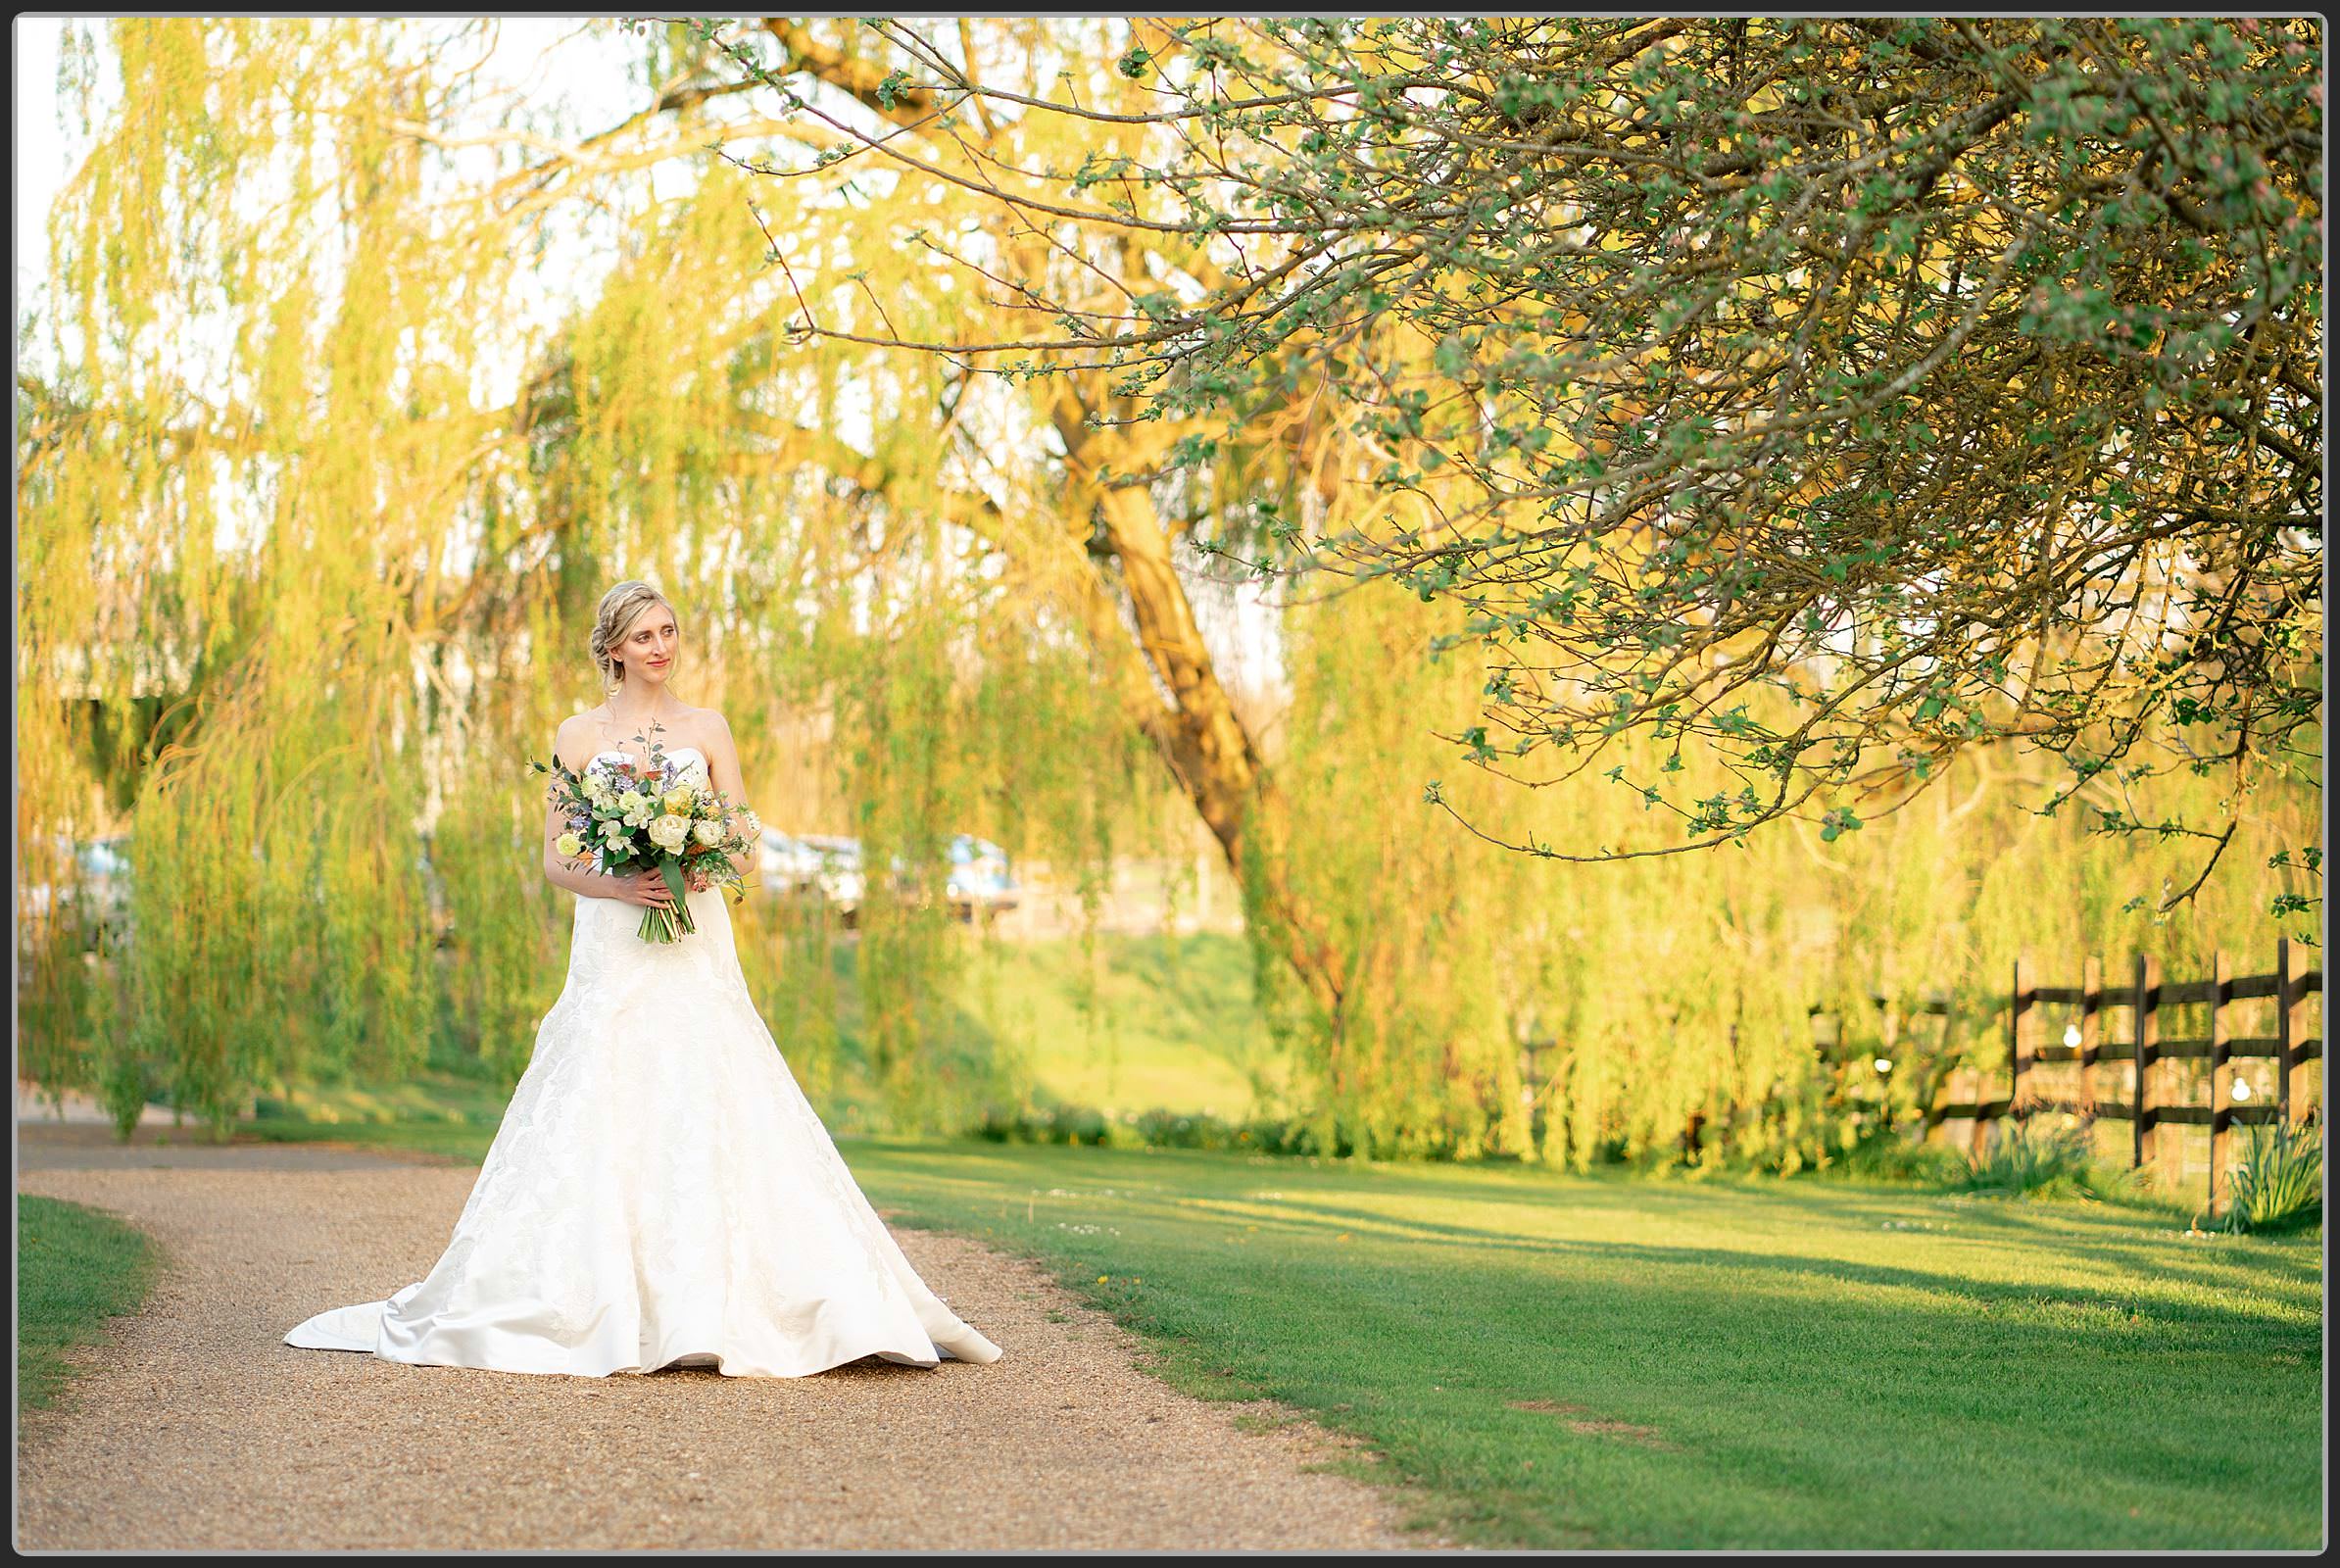 The bride at Crockwell Farm